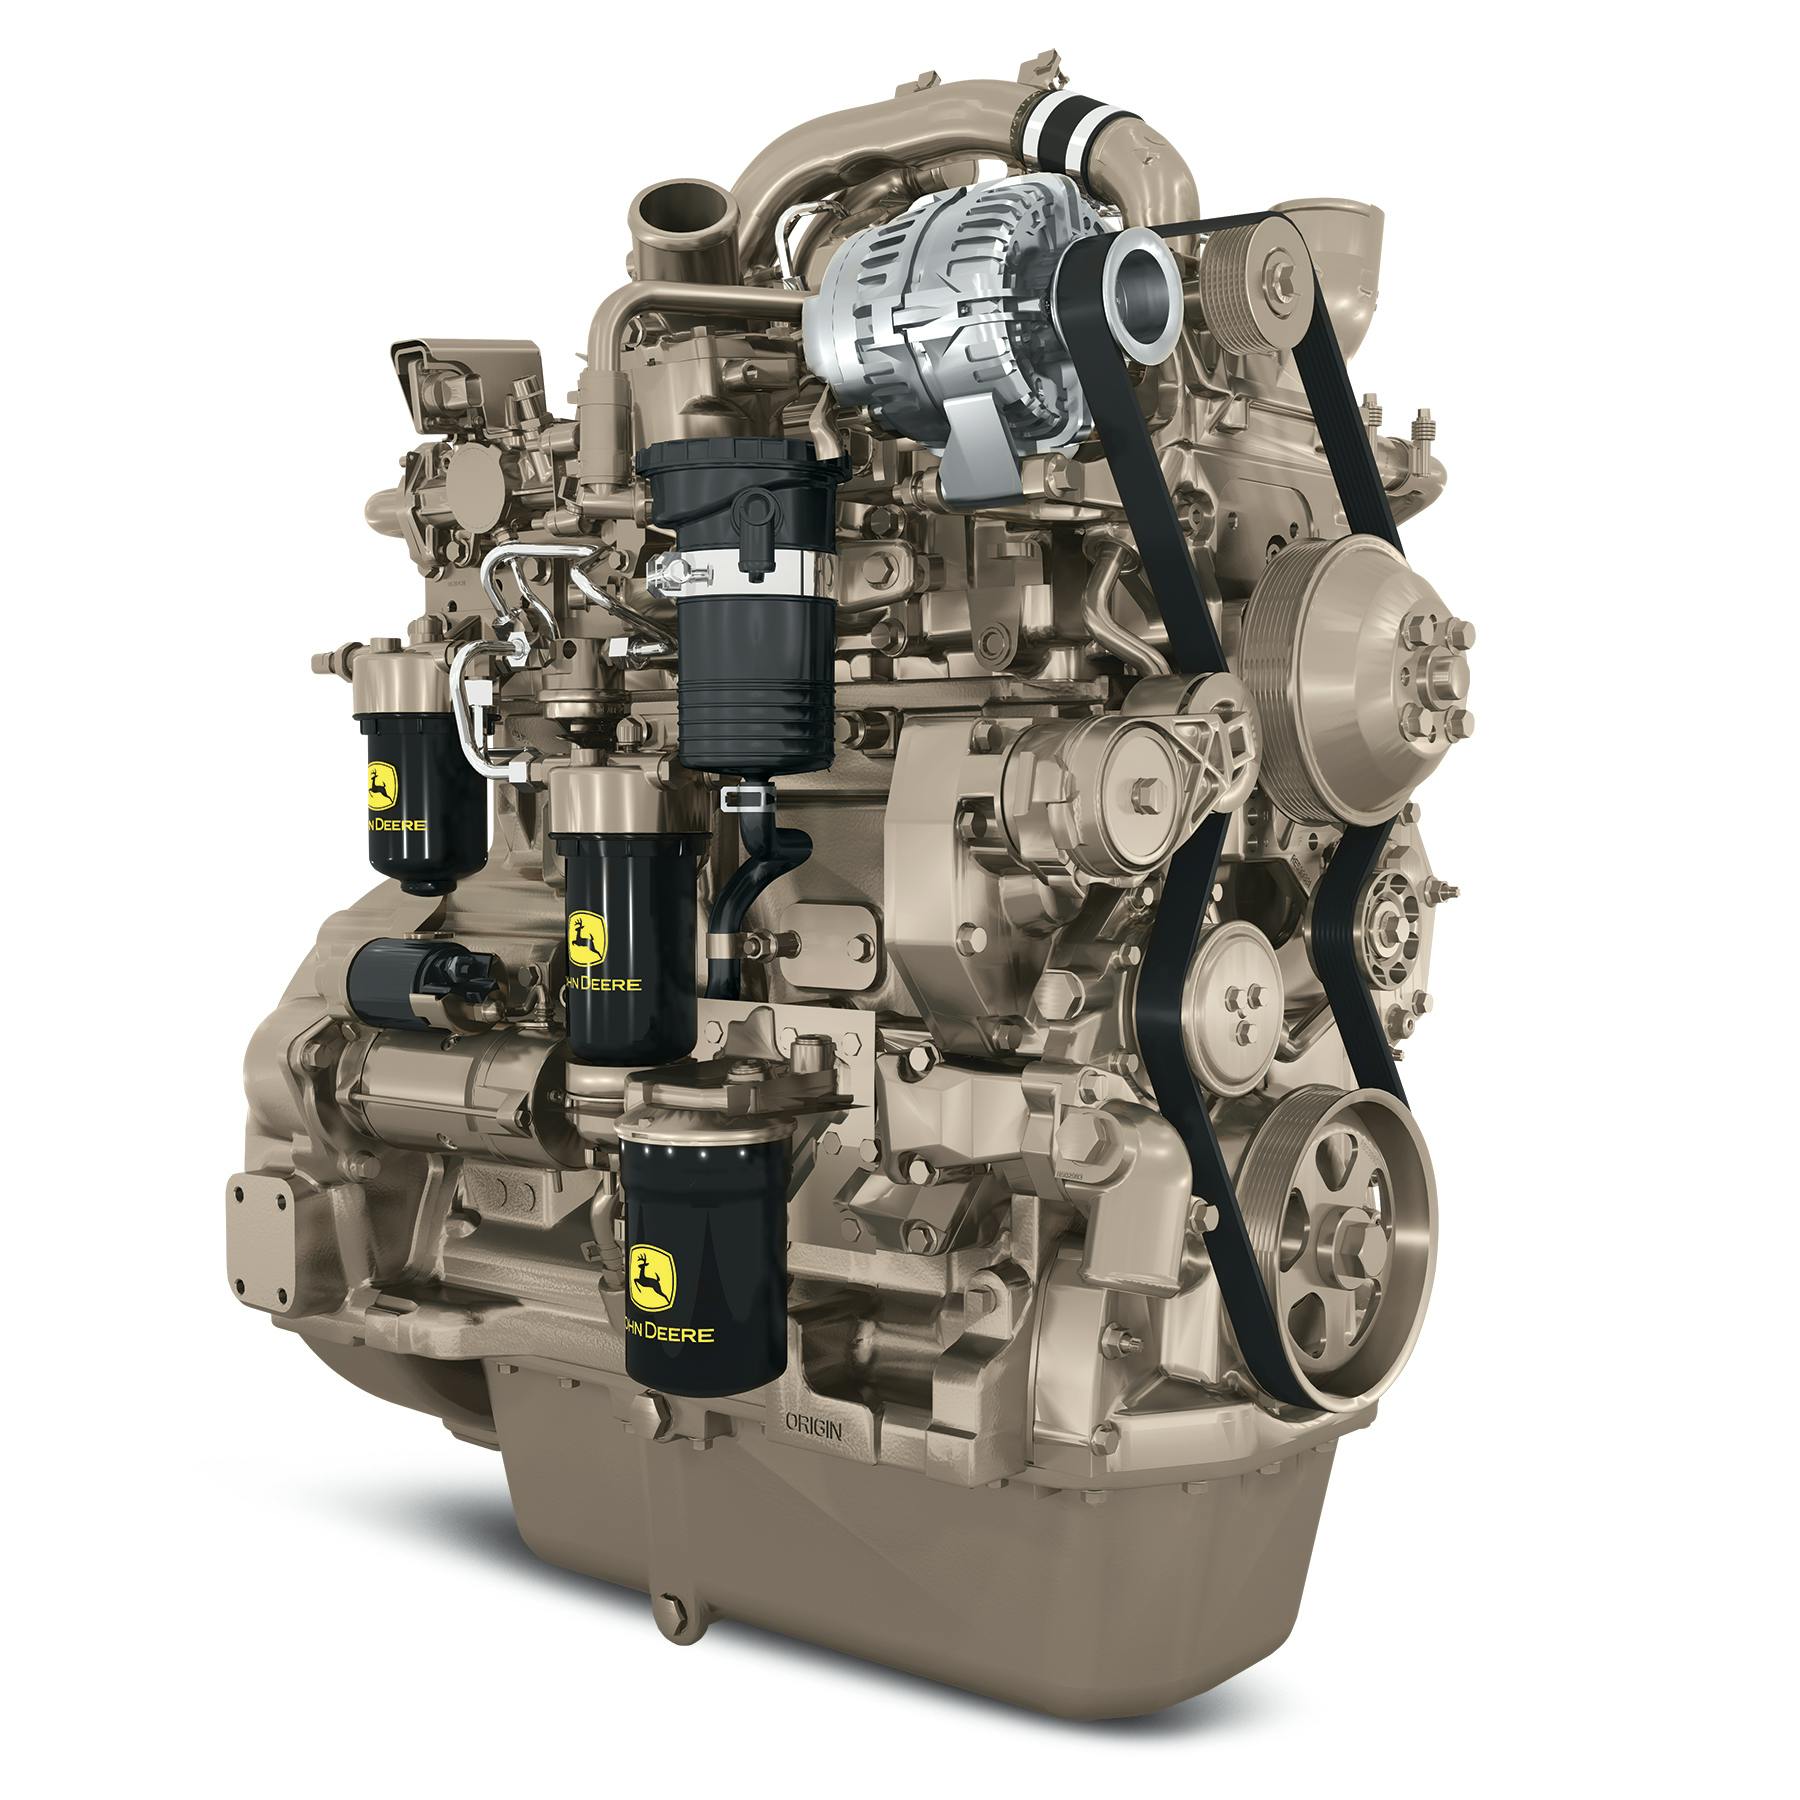 Deere's New Tier 4 Final PSL 4.5L Engine is Compact Package | Construction News